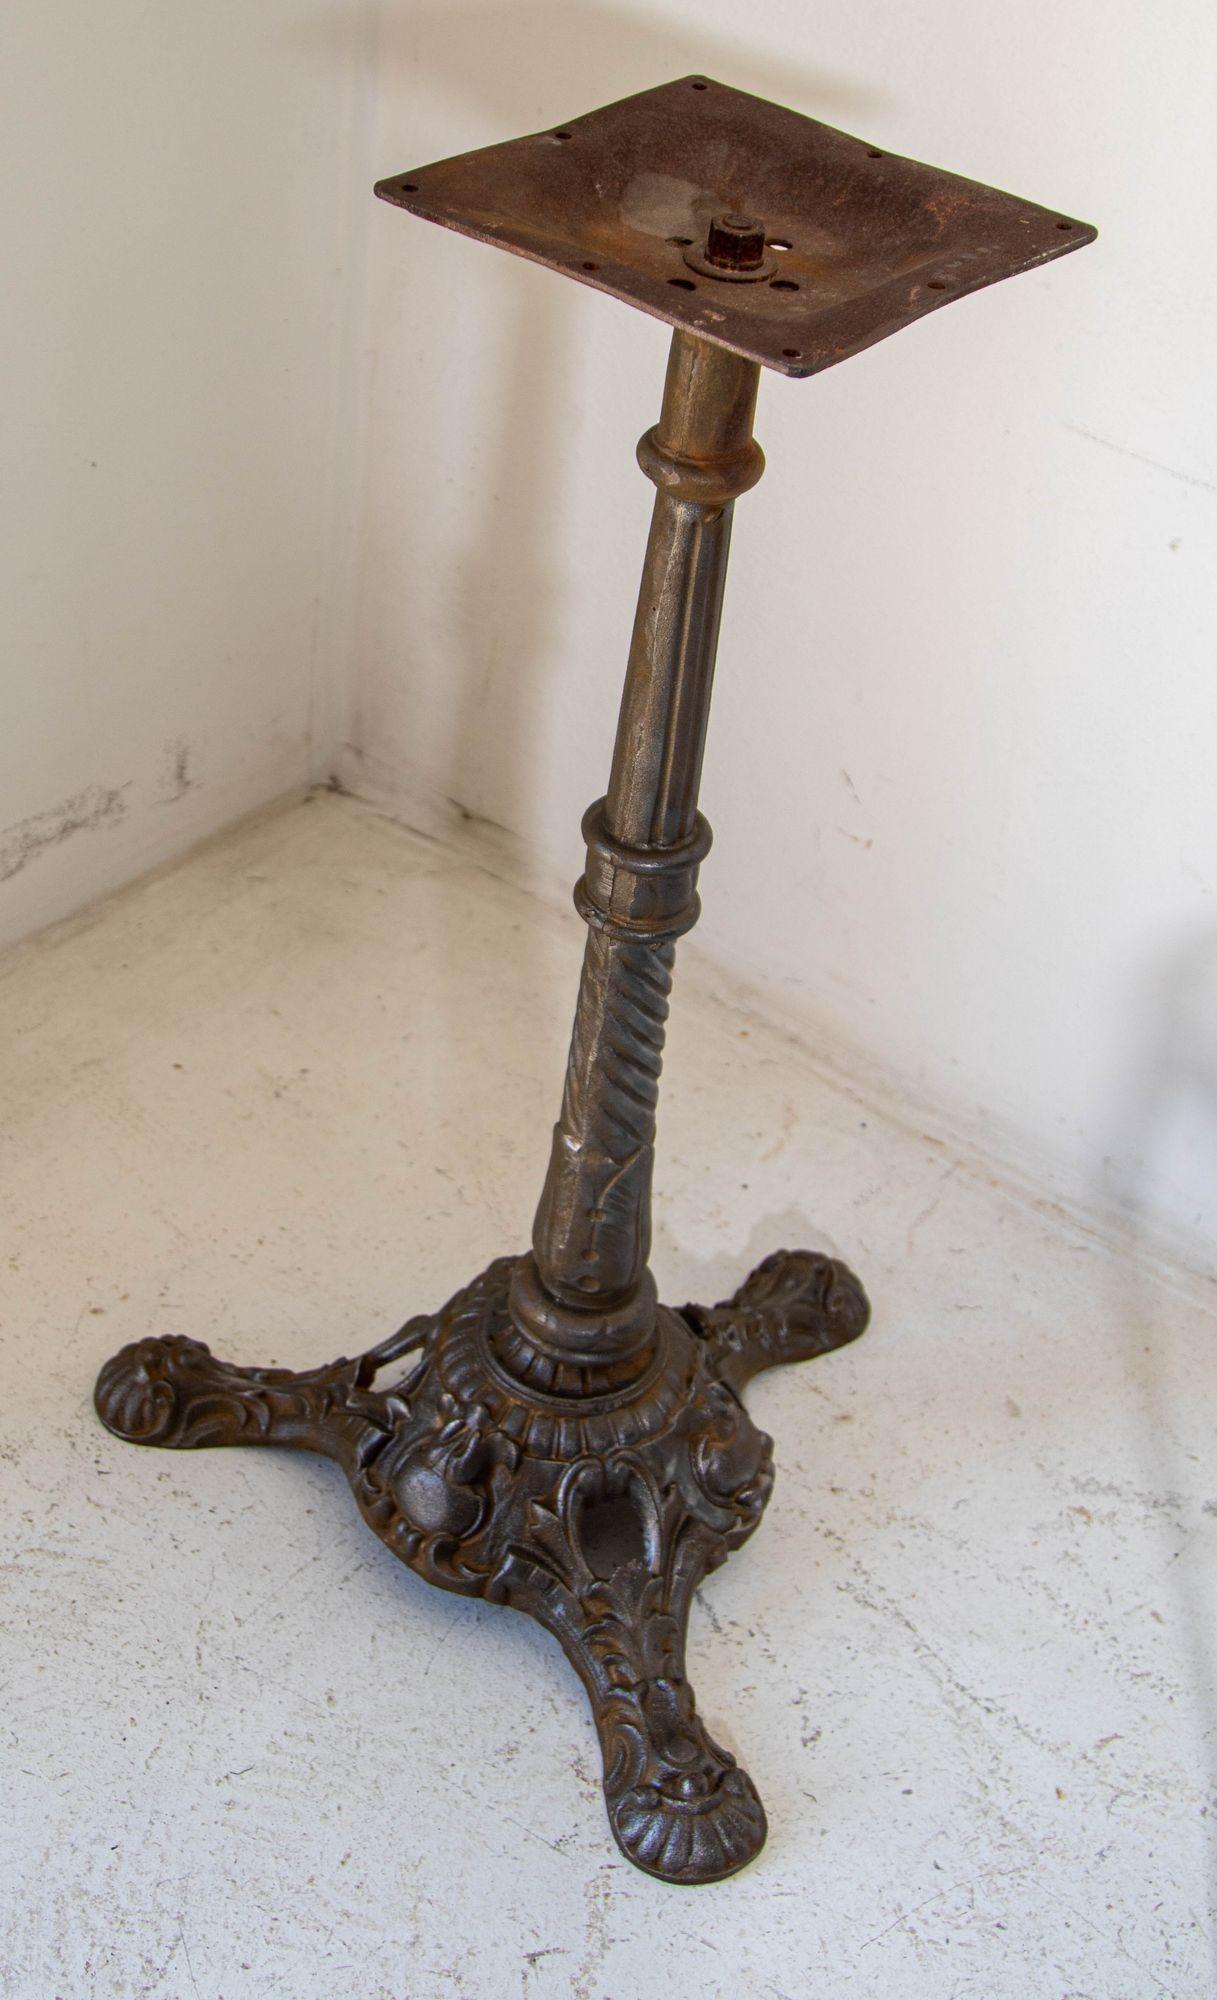 1920s Antique French Cast Iron Pedestal Bistro Table Stand.
Beautiful quality bistro table pedestal from France, made from heavy cast iron supported on 3 beautiful lion shaped pawn.
French Bistro Table Paris cast iron pedestal table base.
Heavy cast